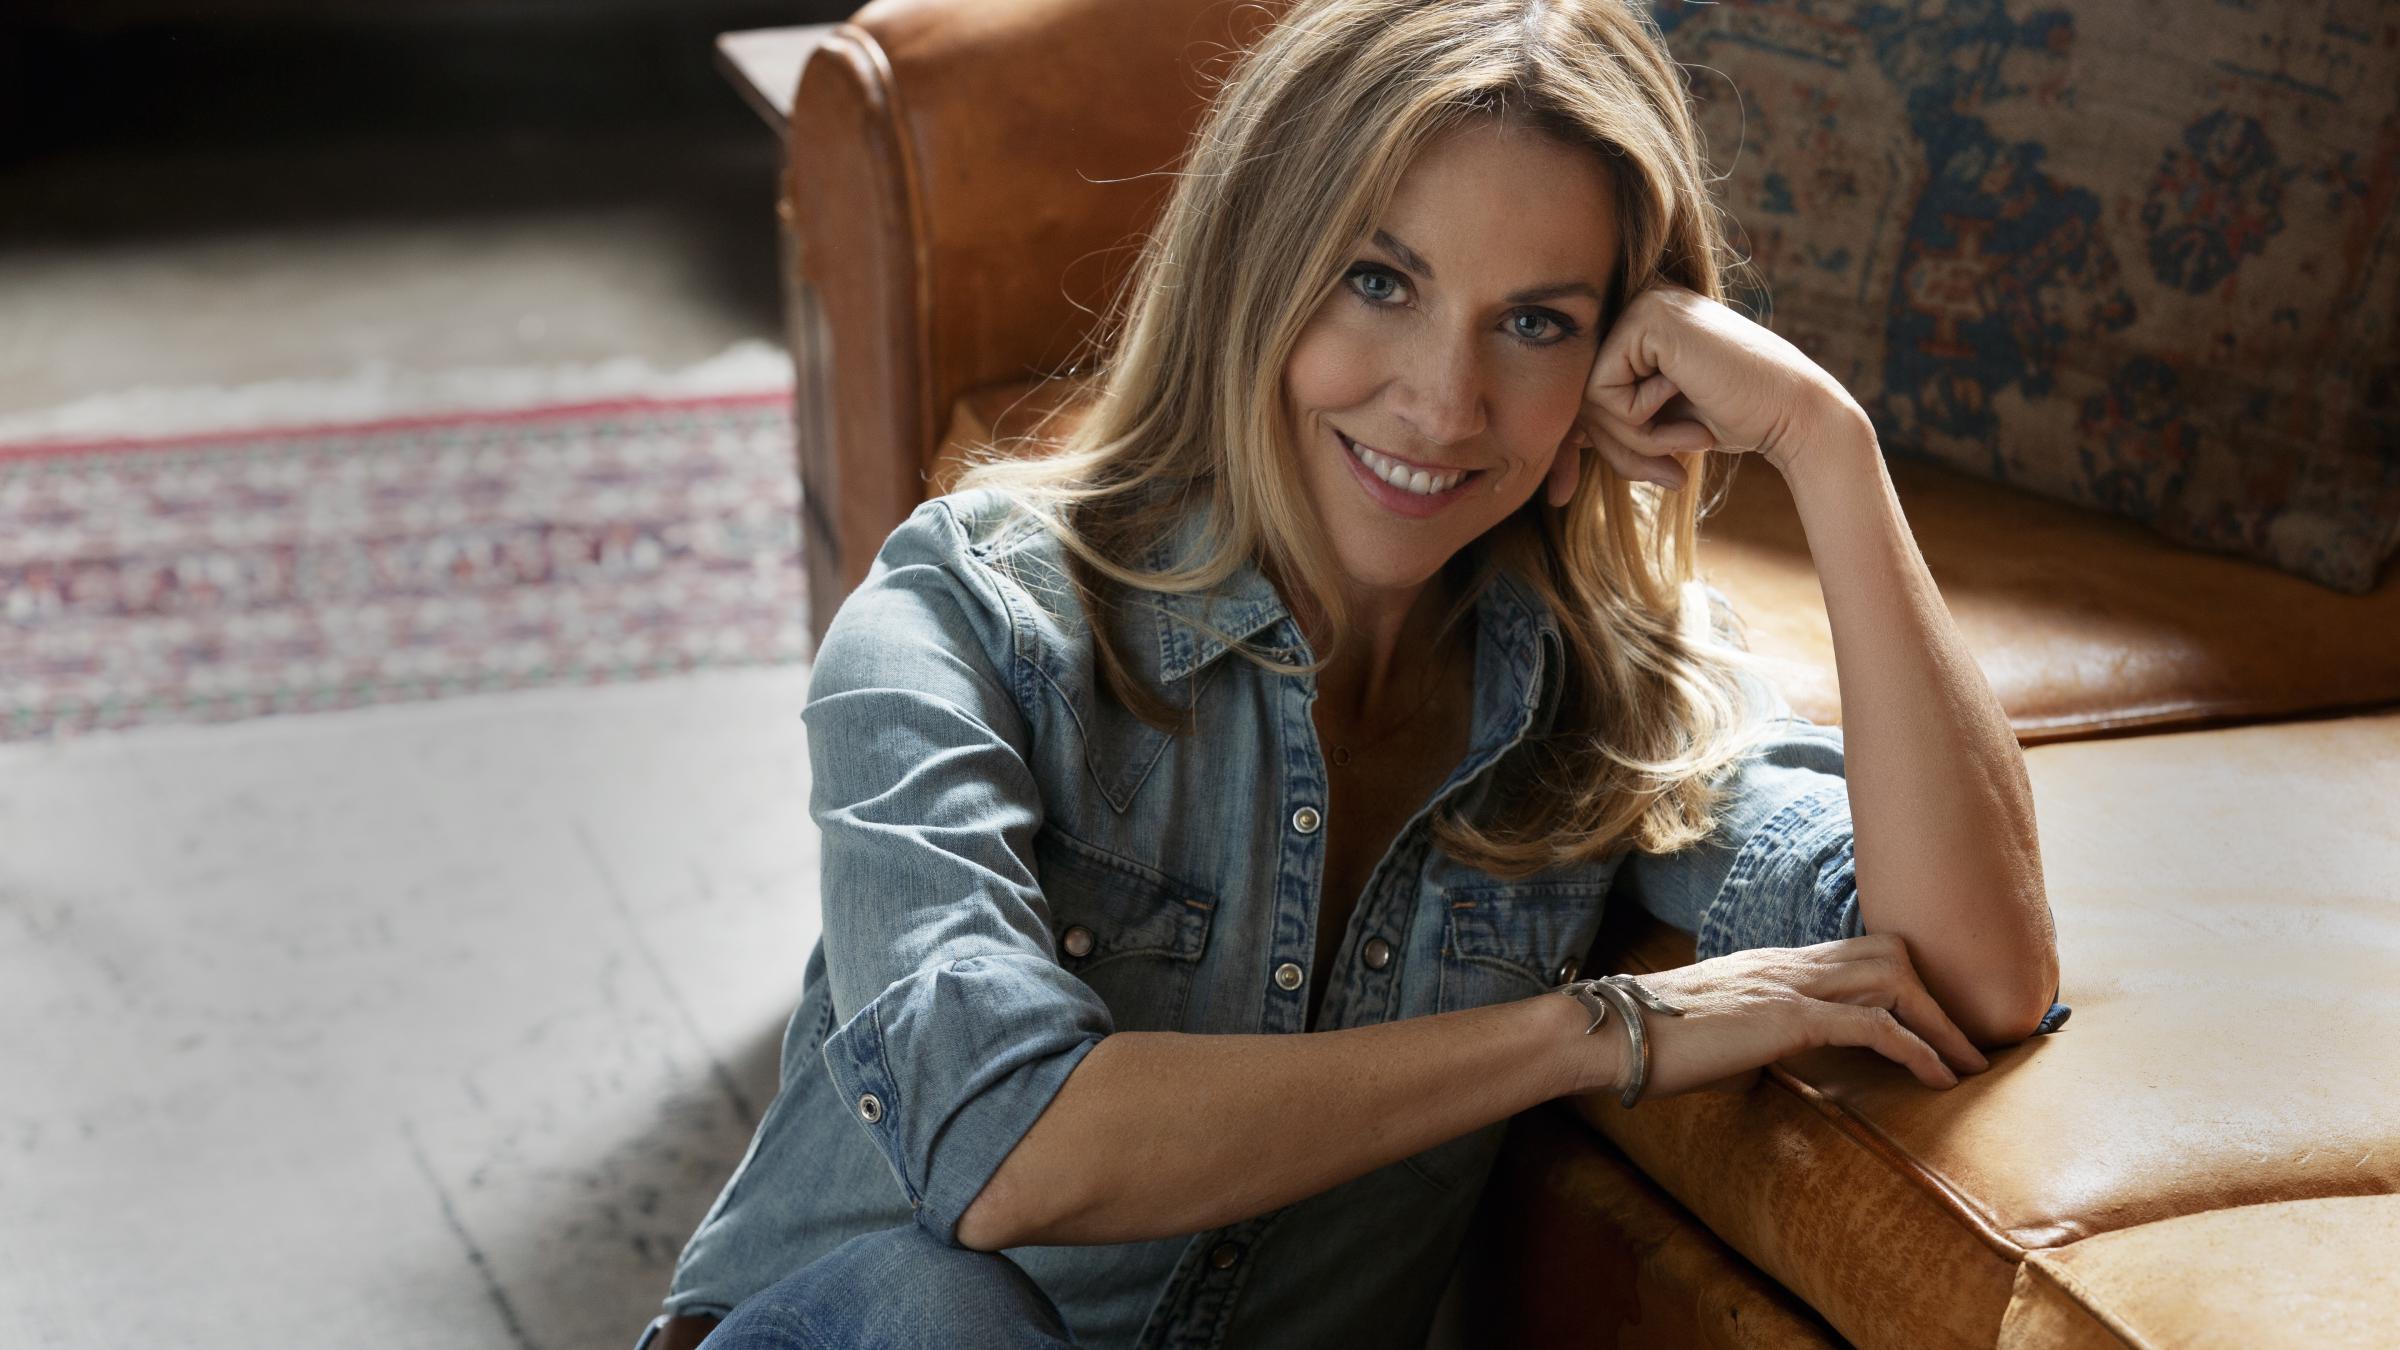 Sheryl Crow Says 'Threads' Is Her Last Album. And She's OK With That | WYSO